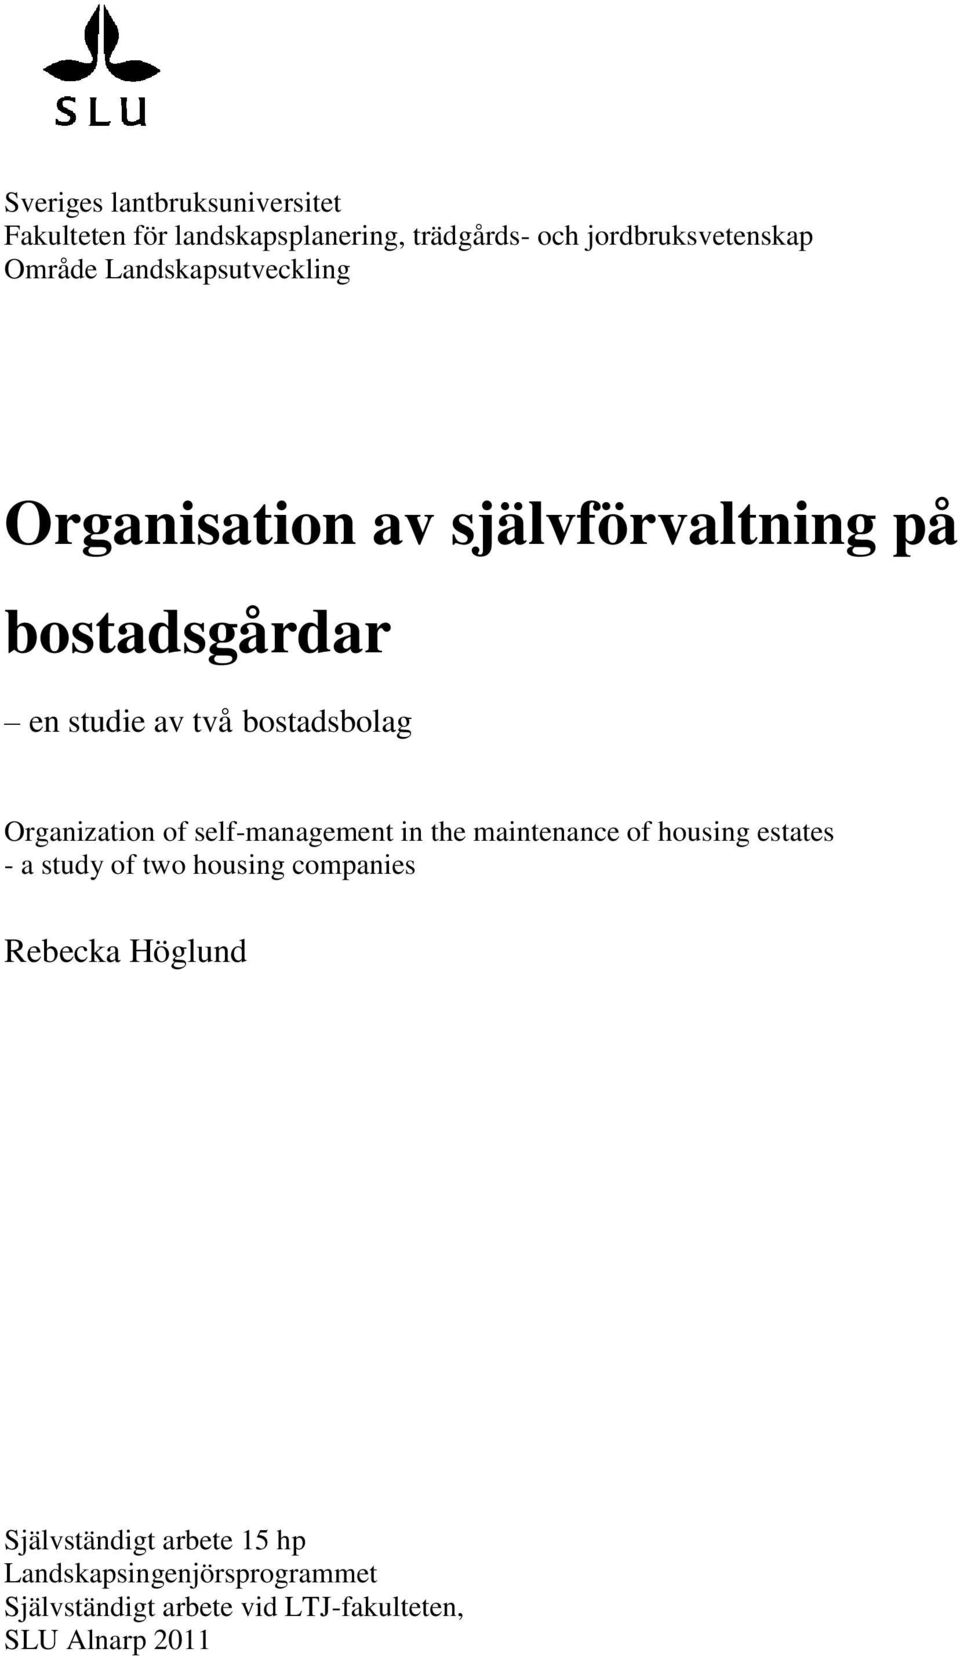 Organization of self-management in the maintenance of housing estates - a study of two housing companies